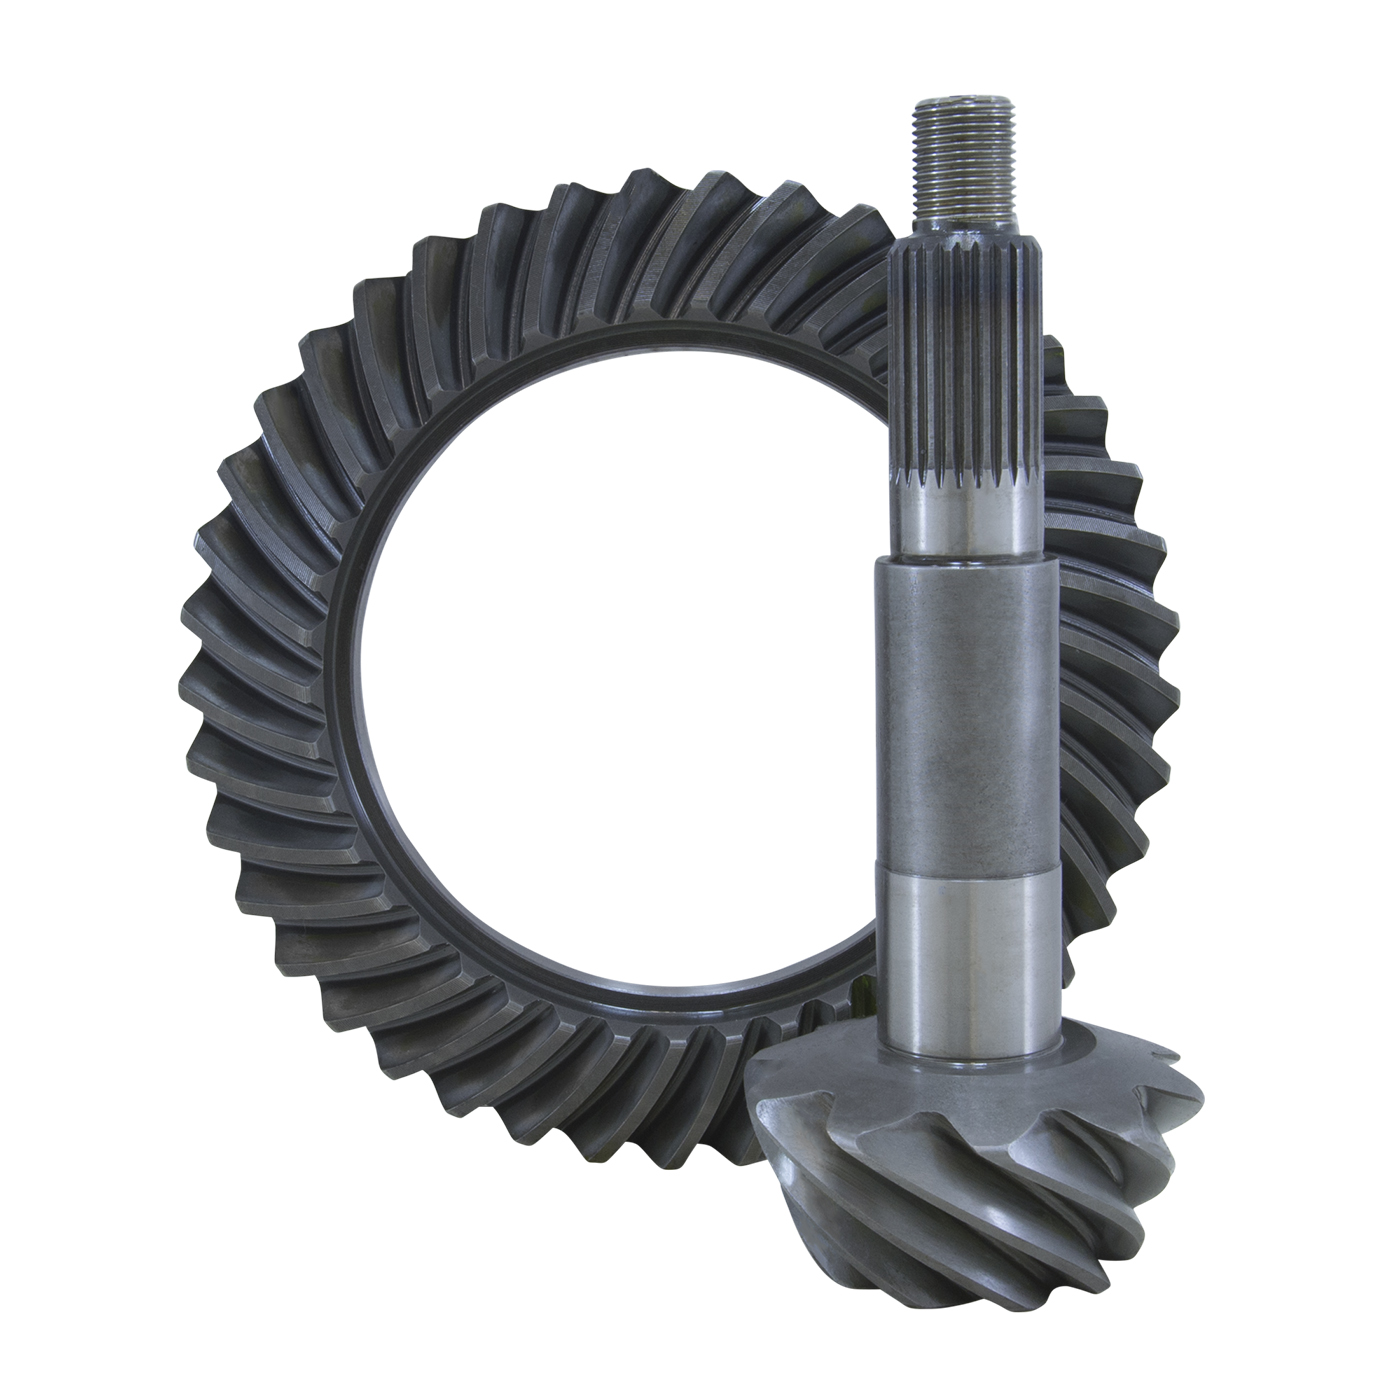 Dana 44 Reverse/High Pinion Performance Ring and Pinion Differential Set Motive Gear D44-456F 4.56 Ratio 41-9 Teeth 